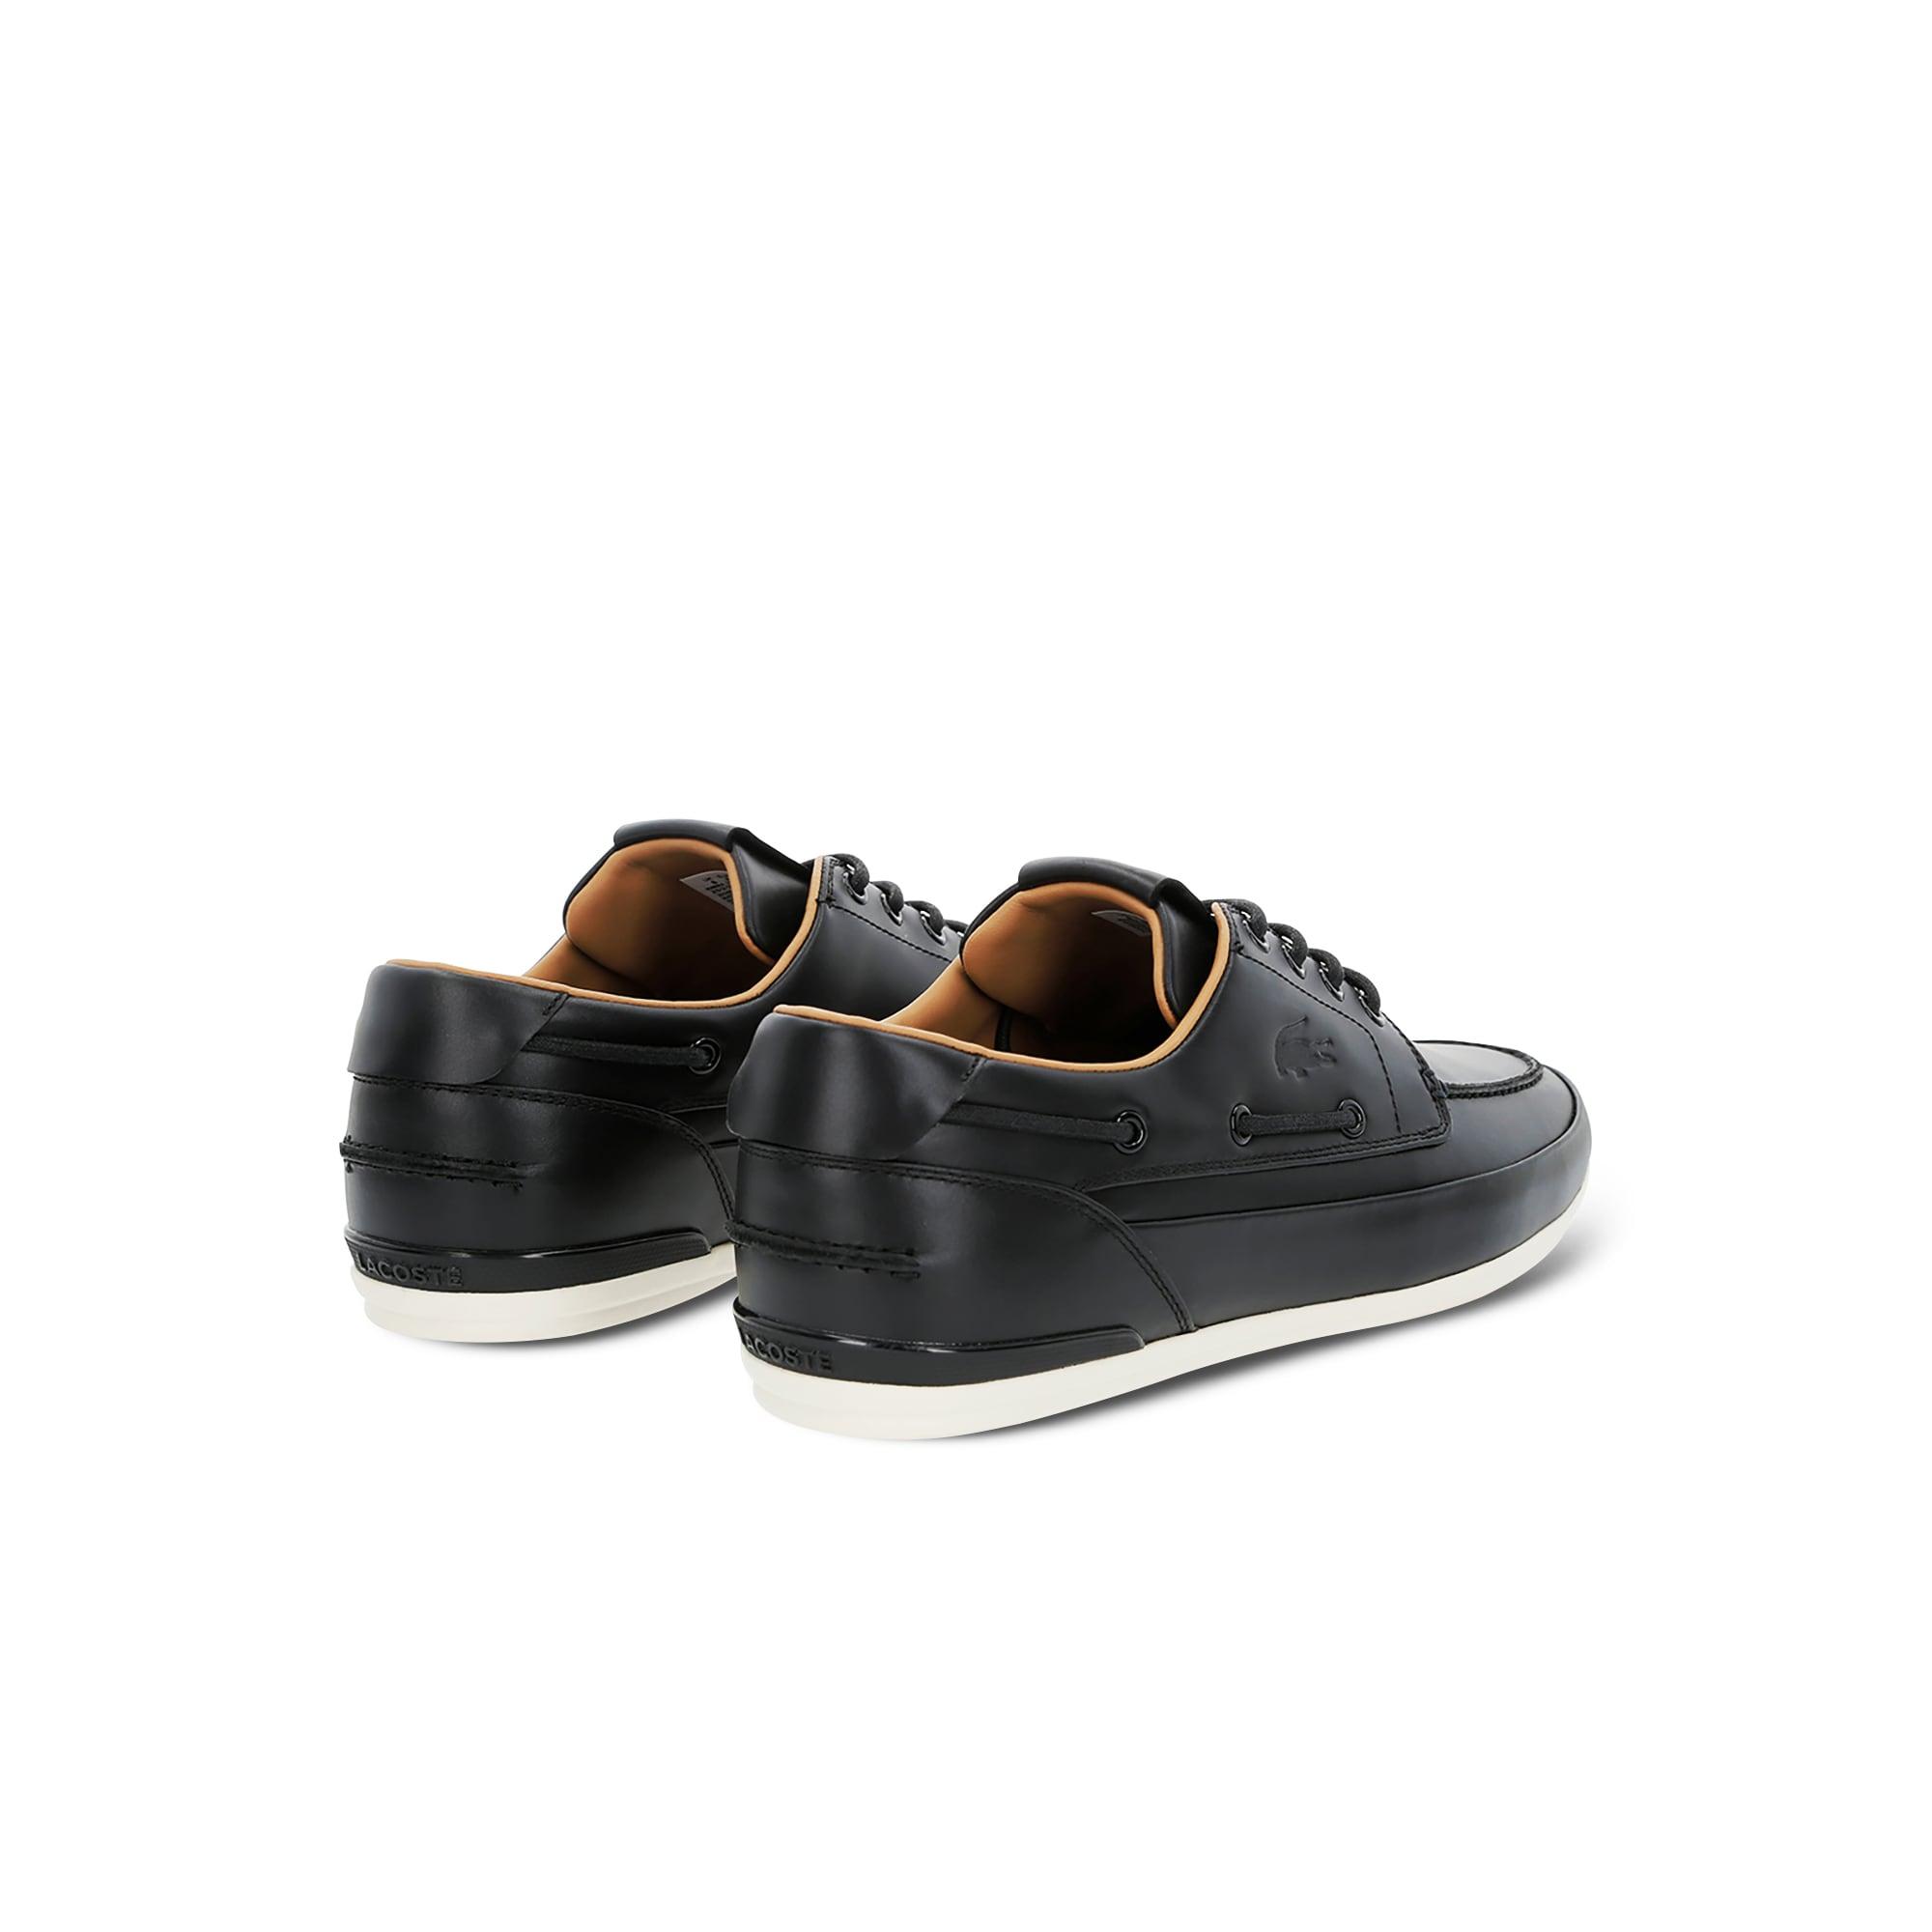 Lacoste Marina Premium Leather Deck Shoes in Black for Men - Lyst